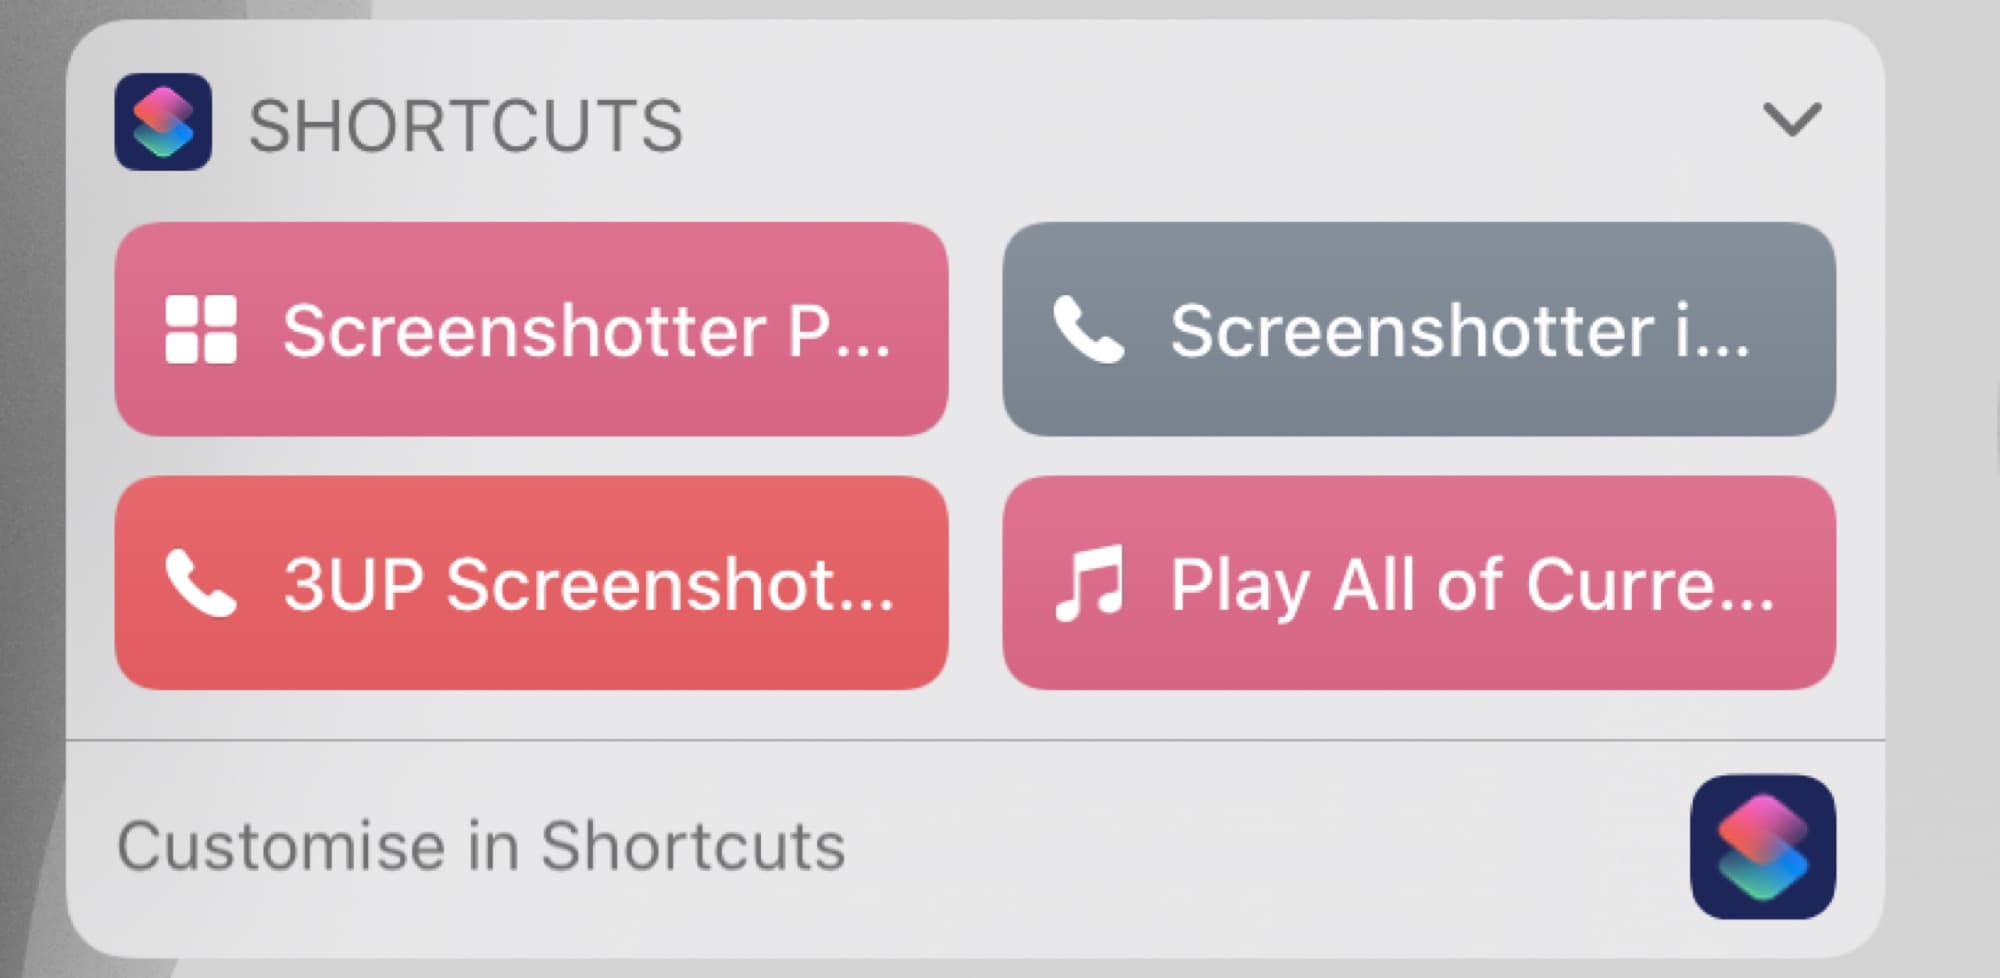 If you only use one widget, make that widget the Shortcuts widget. 